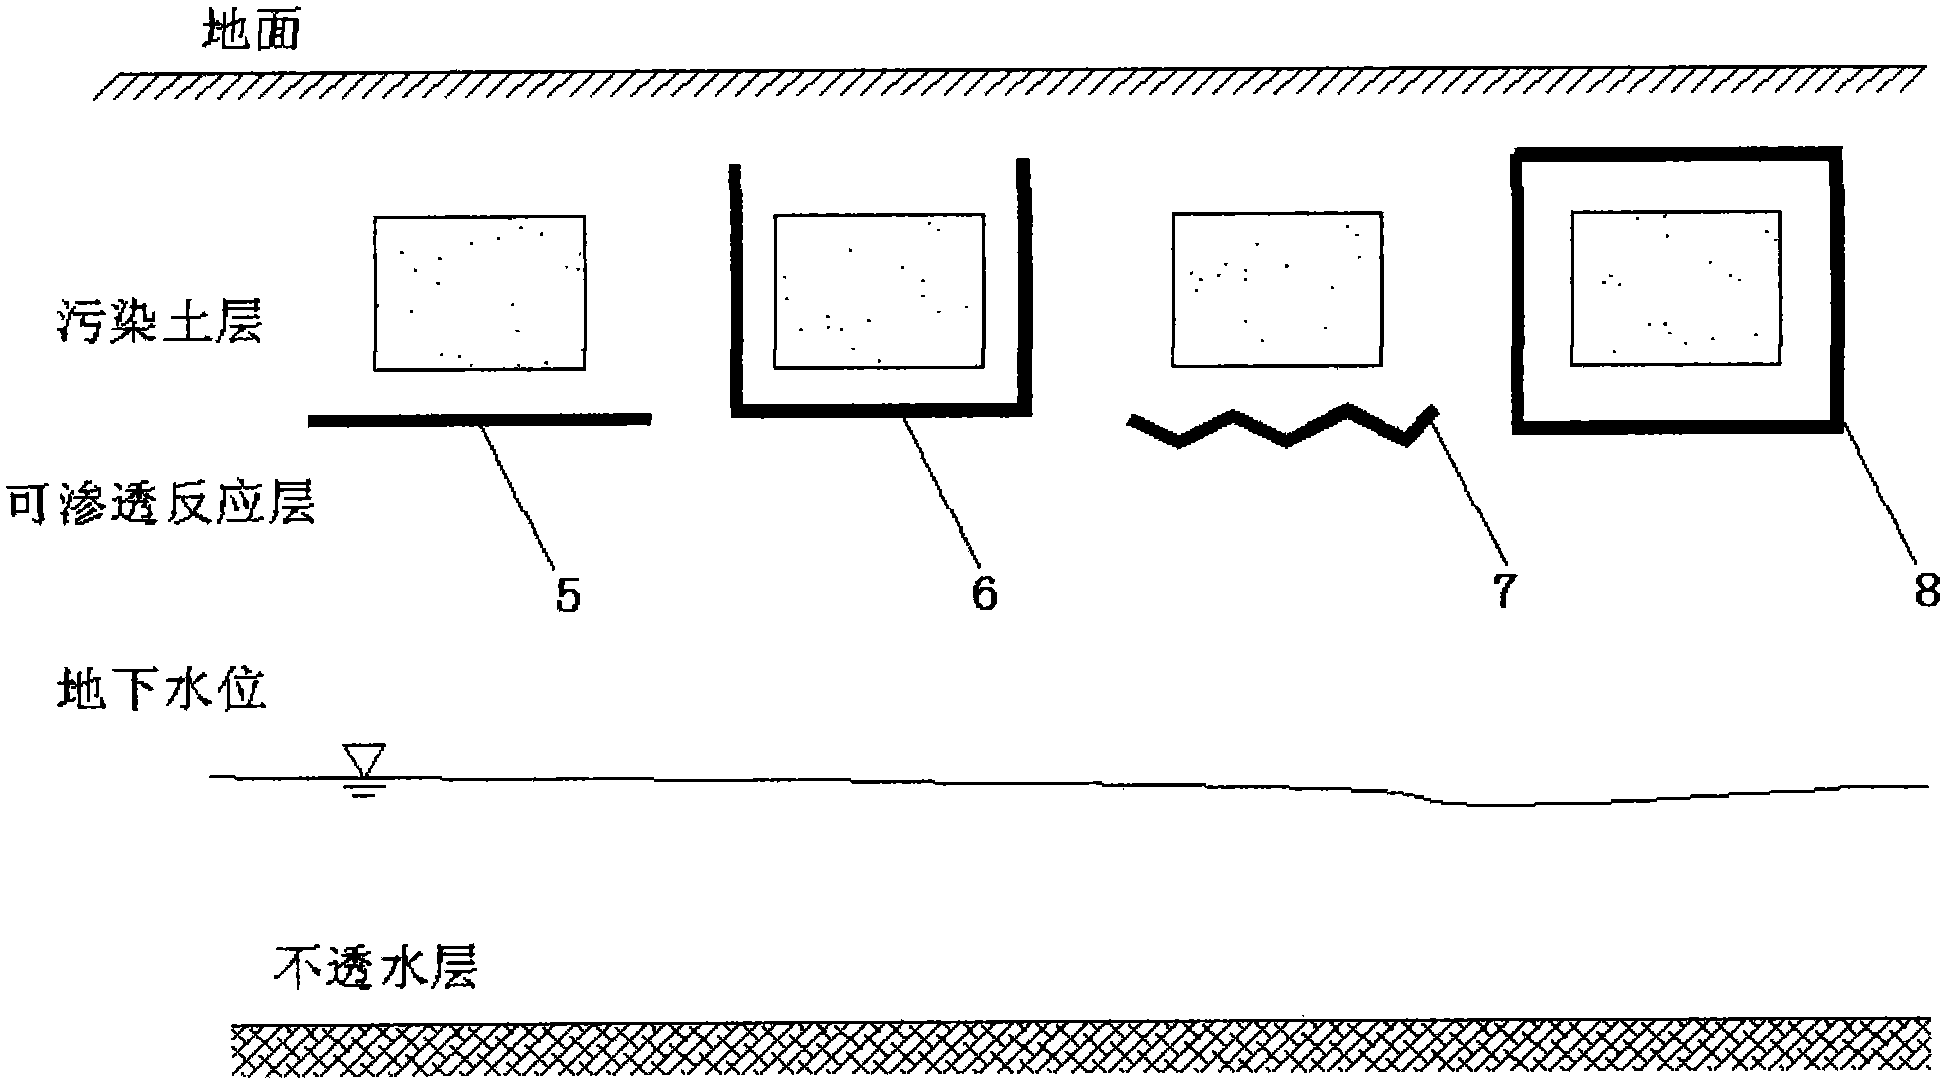 Horizontal permeable reaction layer for soil remediation and soil remediating method